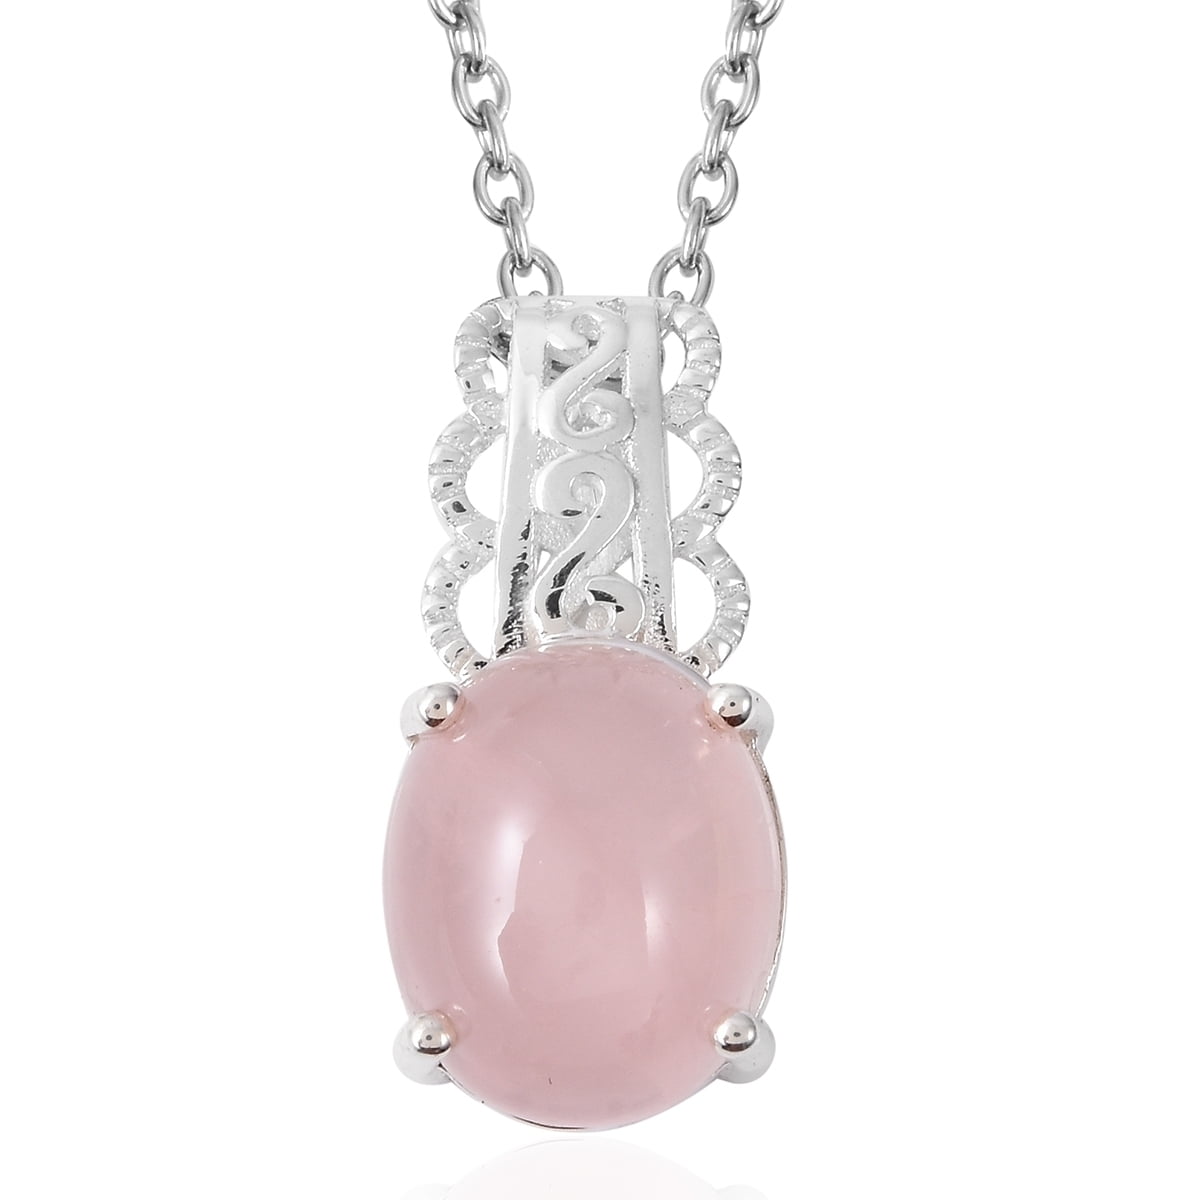 Beautiful Rose Quartz Pendant on a Sterling Silver Chain